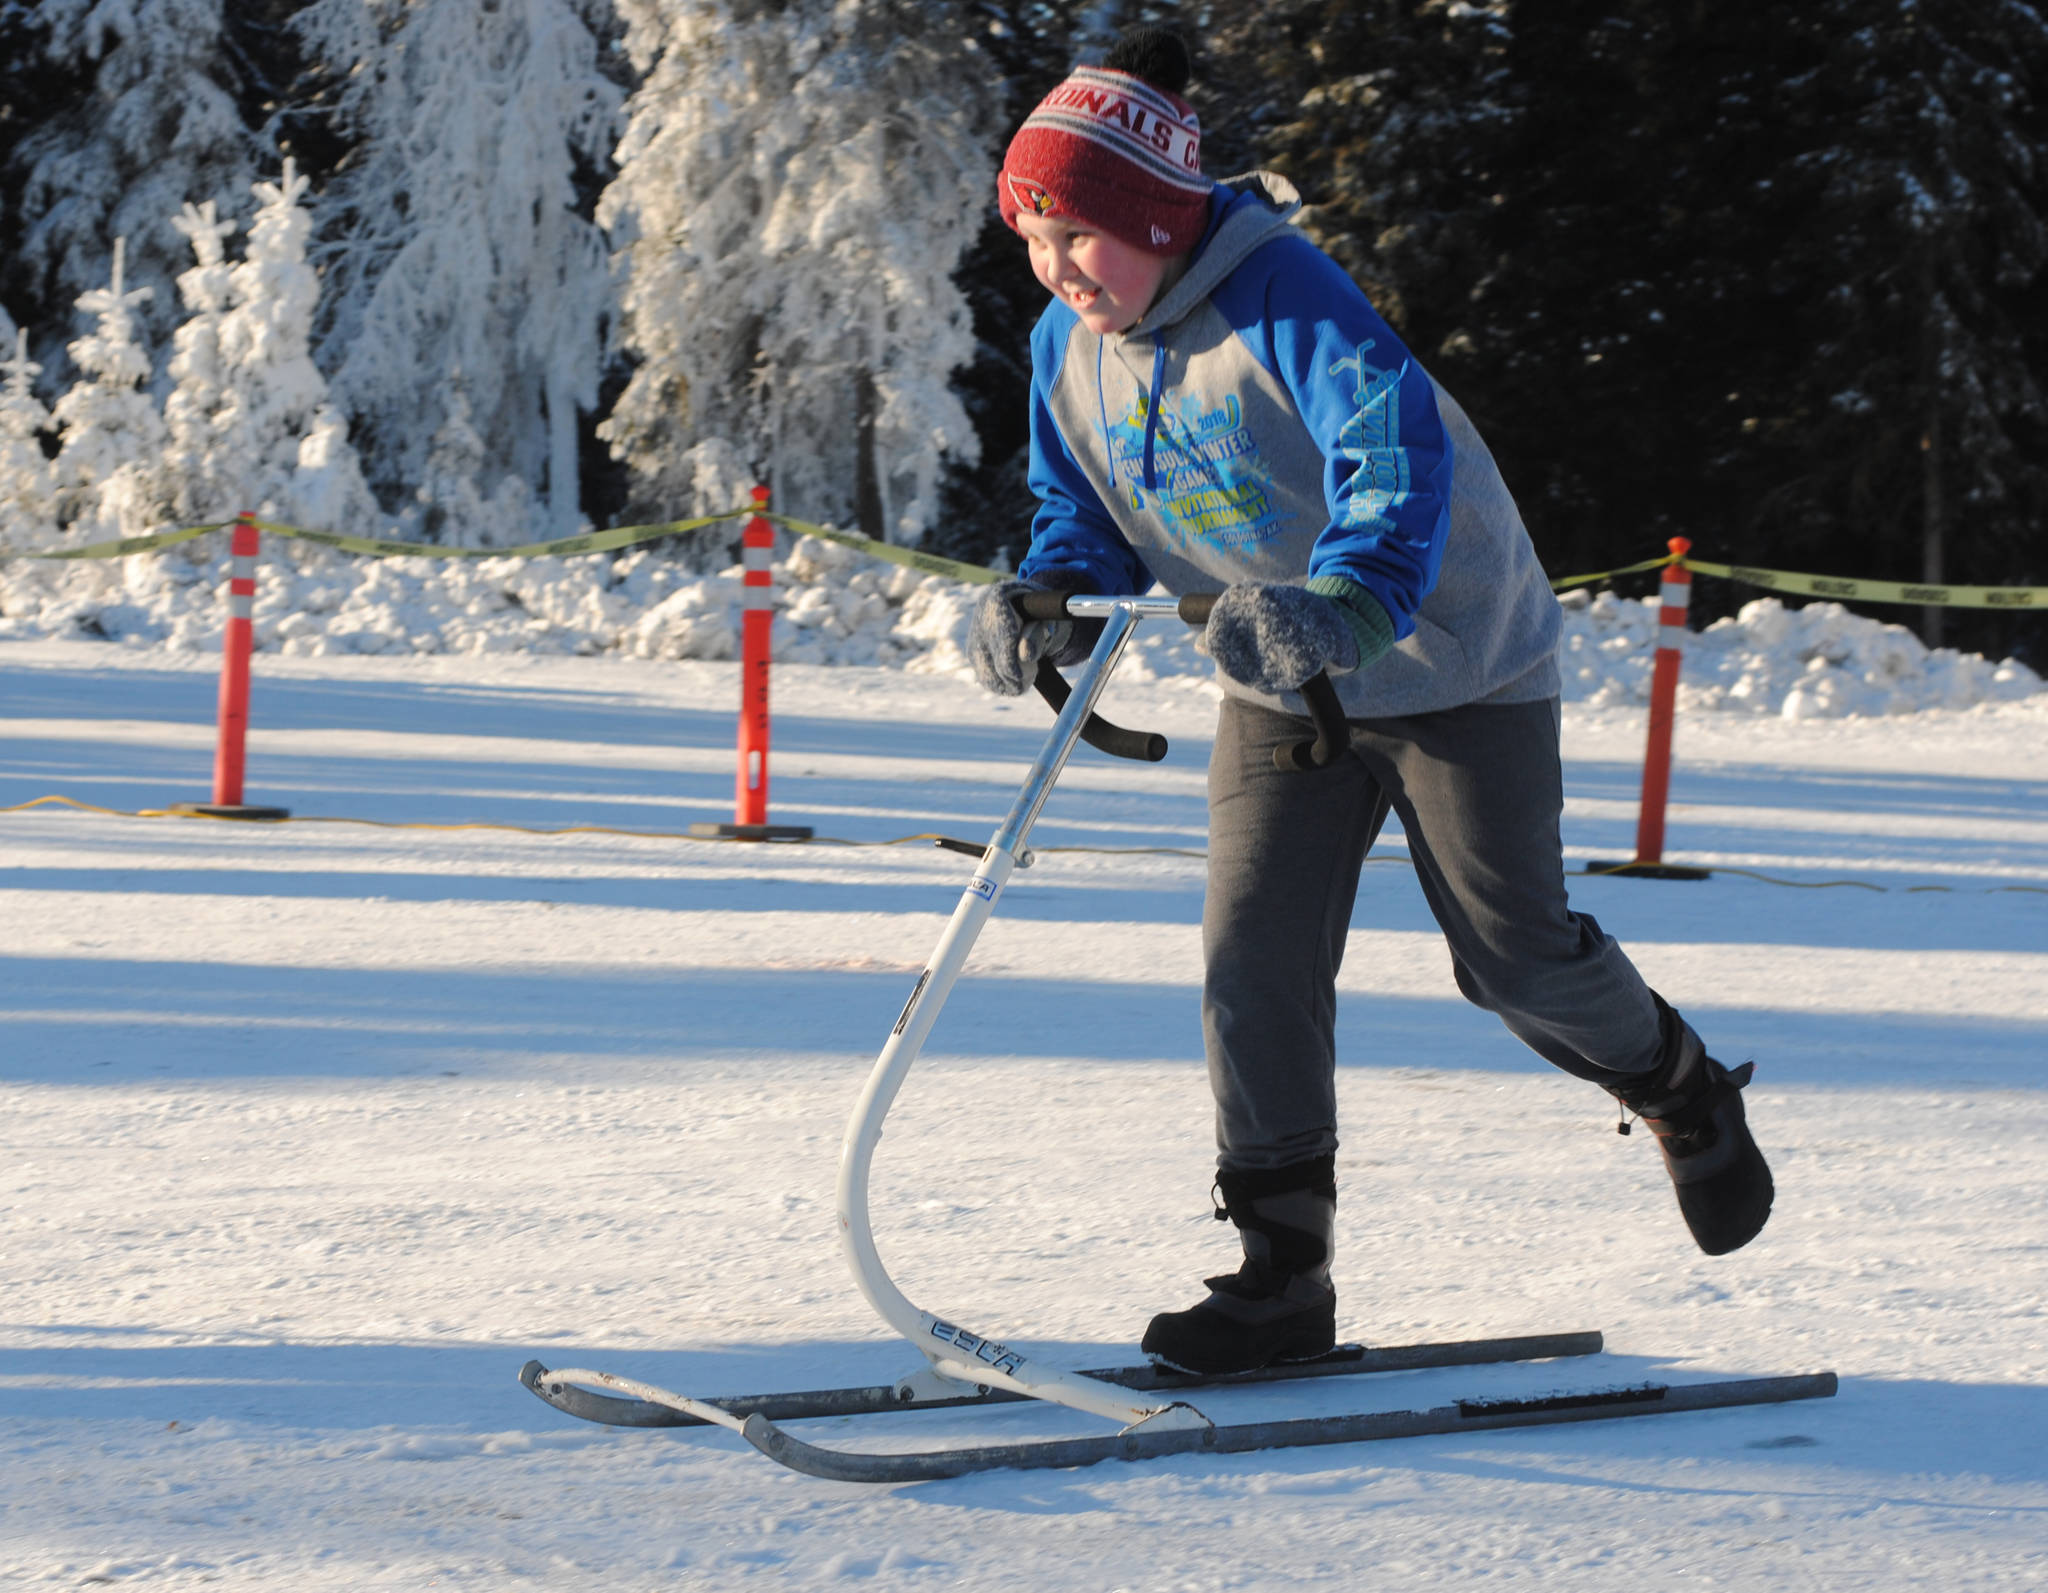 Colin Ellsworth enjoys one of the many activities available during the 42nd Kenai Peninsula Winter Games at Soldotna Regional Sports Center in Soldotna, Alaska on Saturday. (Photo by Kat Sorensen/Peninsula Clarion)